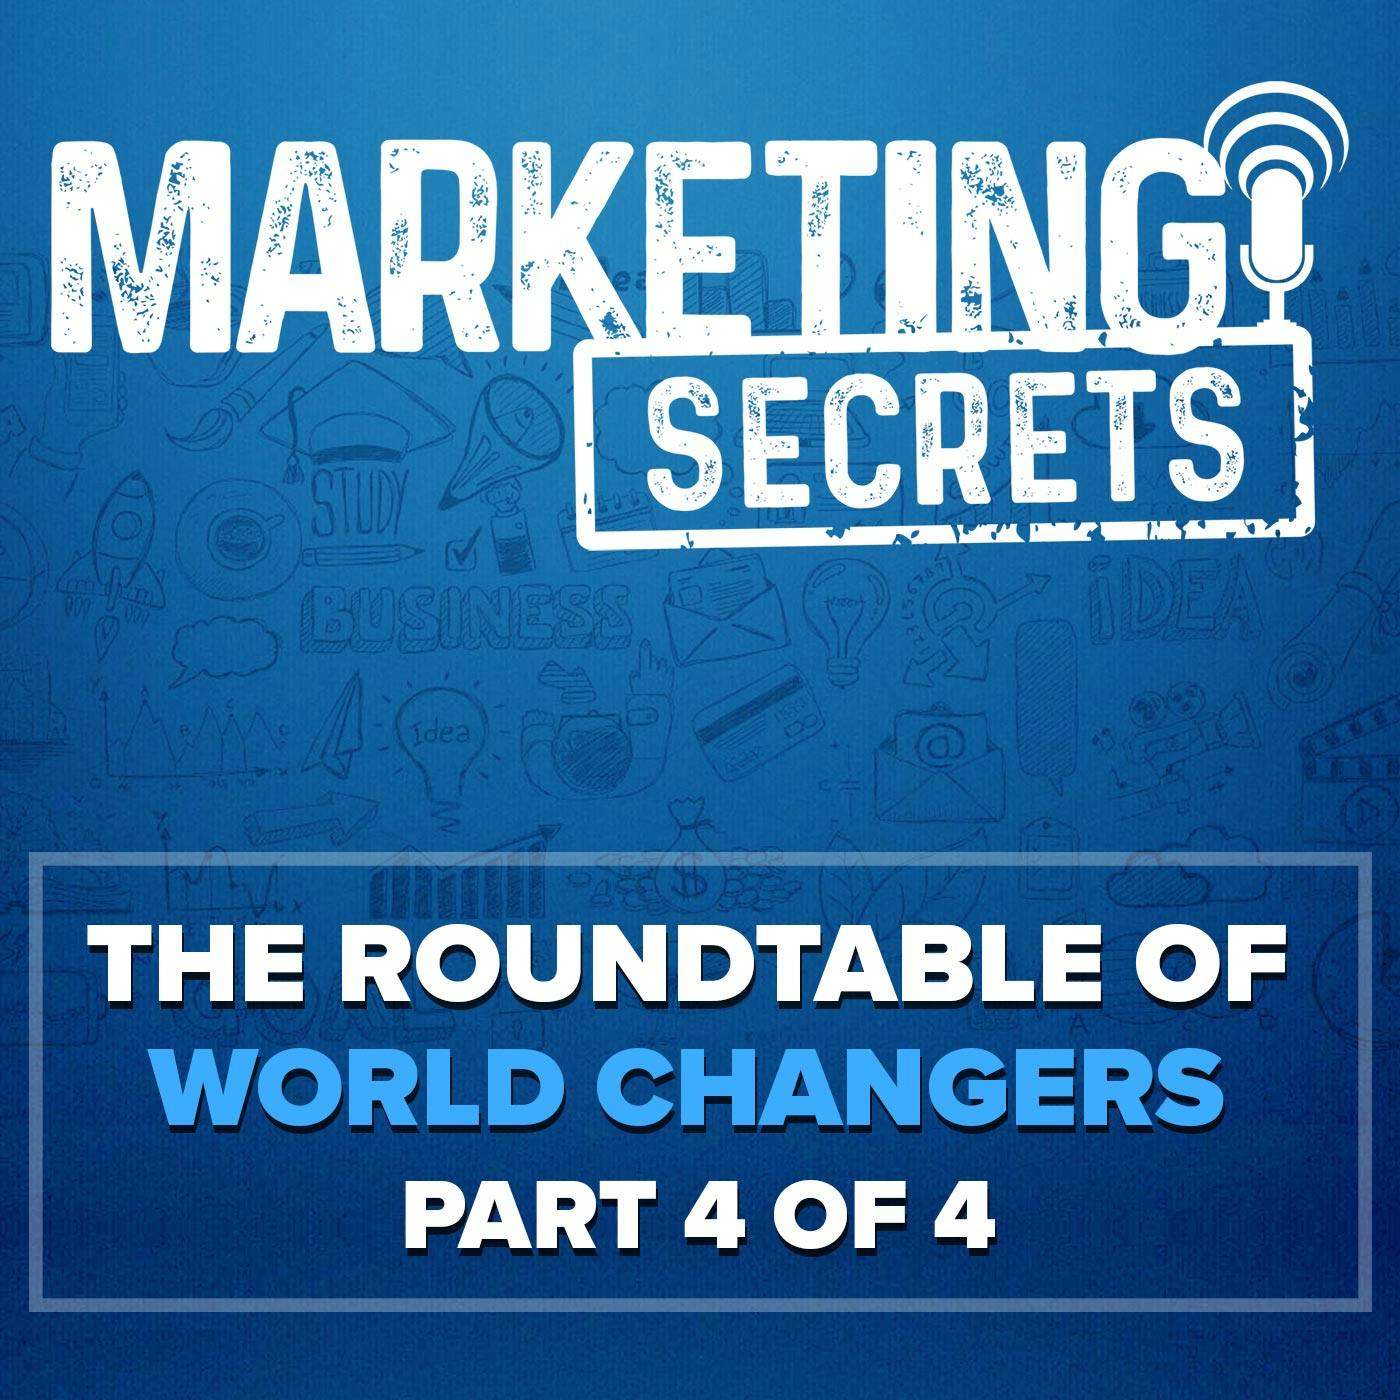 The Roundtable of World Changers (Part 4 of 4)